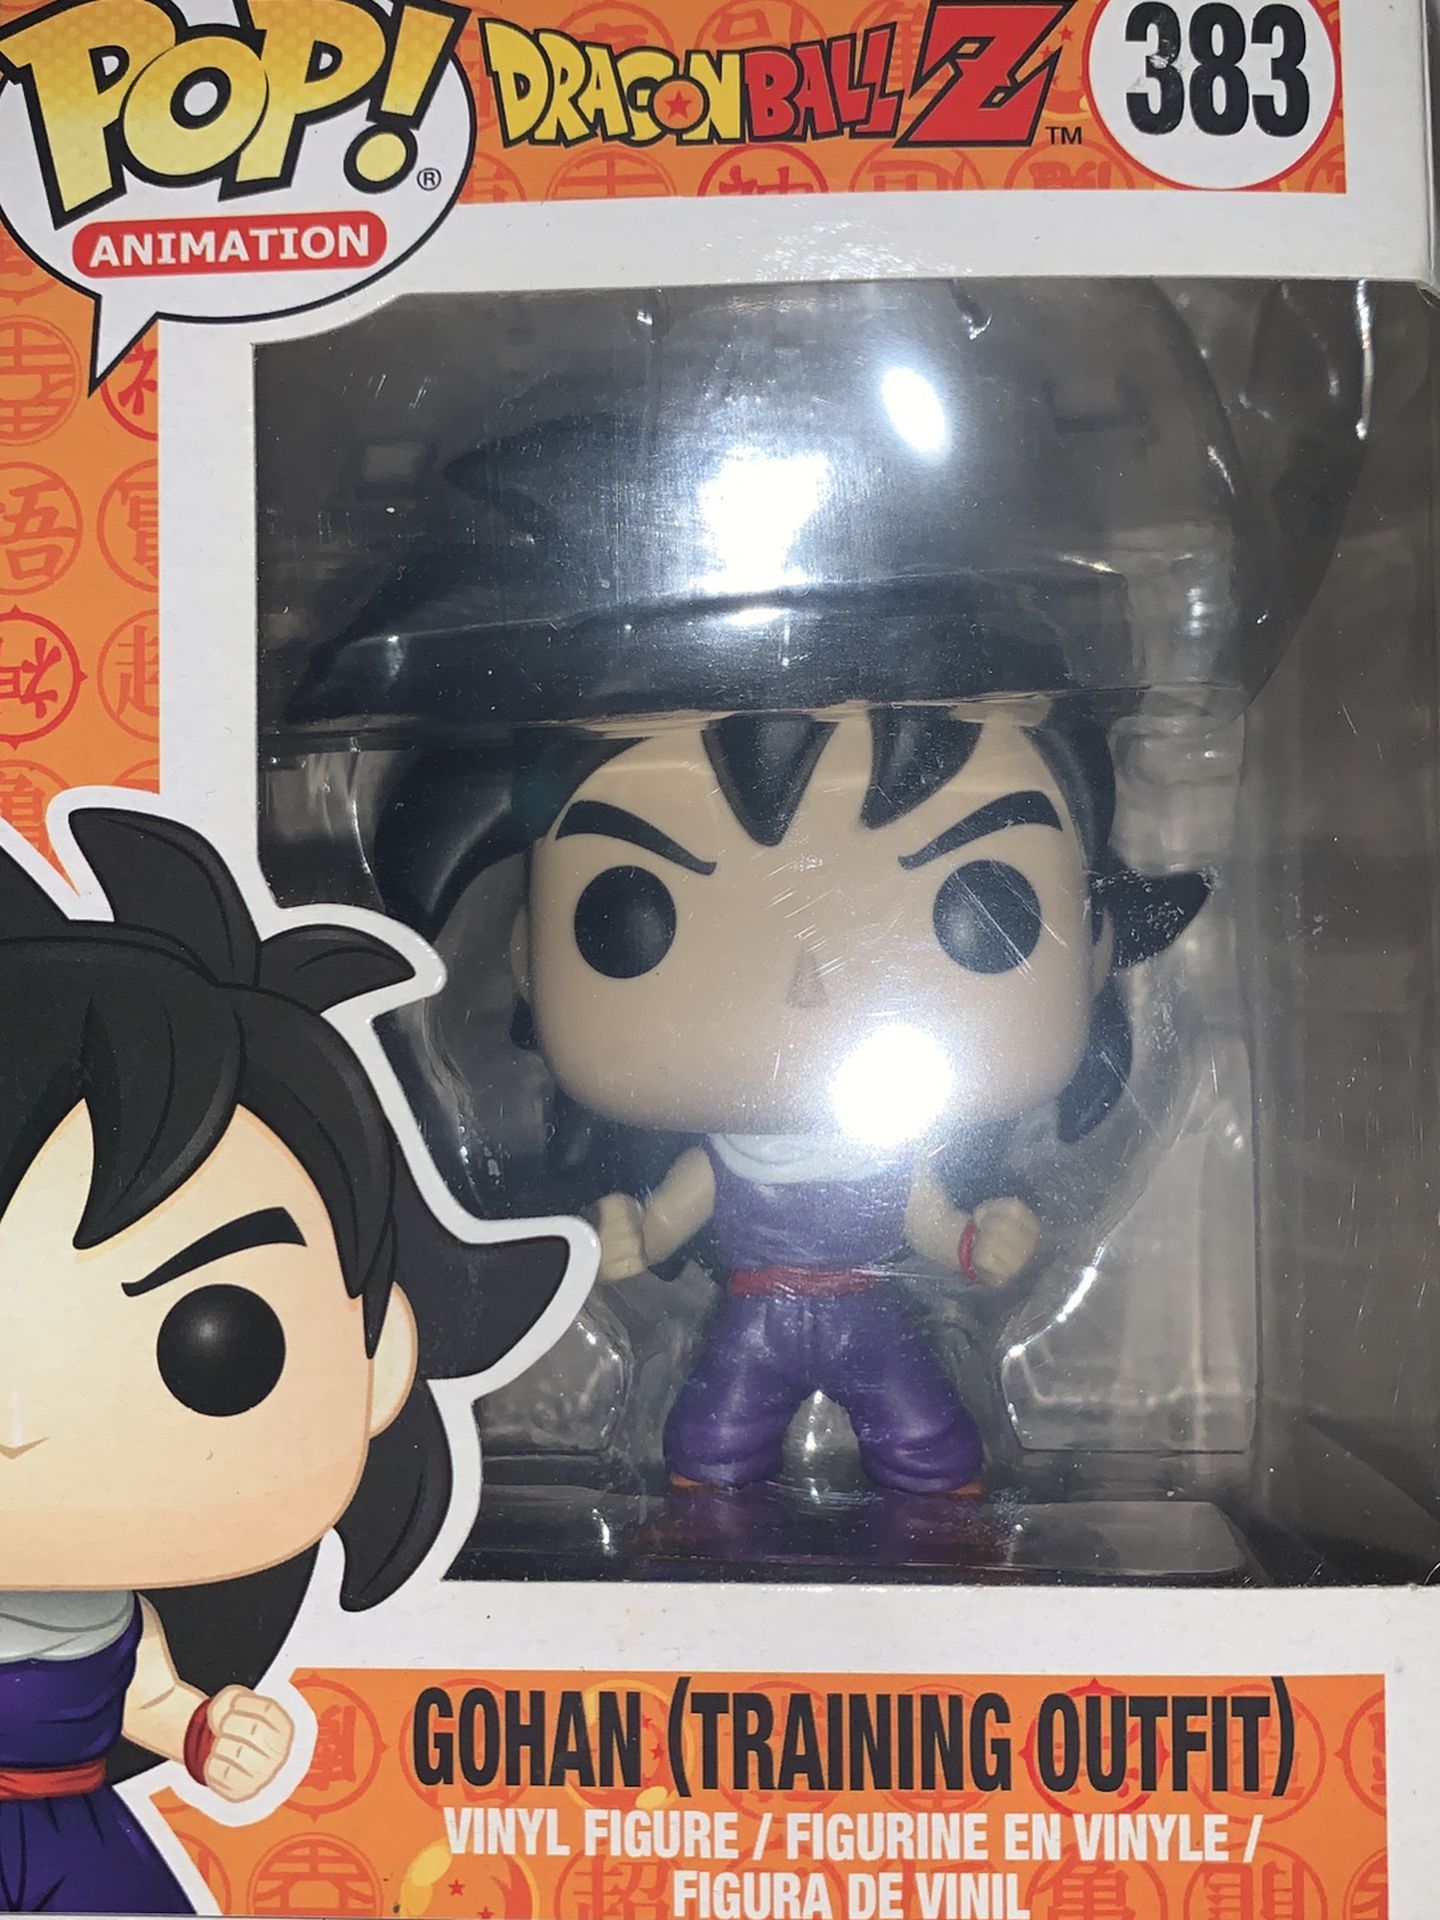 Dragonball Z Gohan (Training Outfit) Funkopop